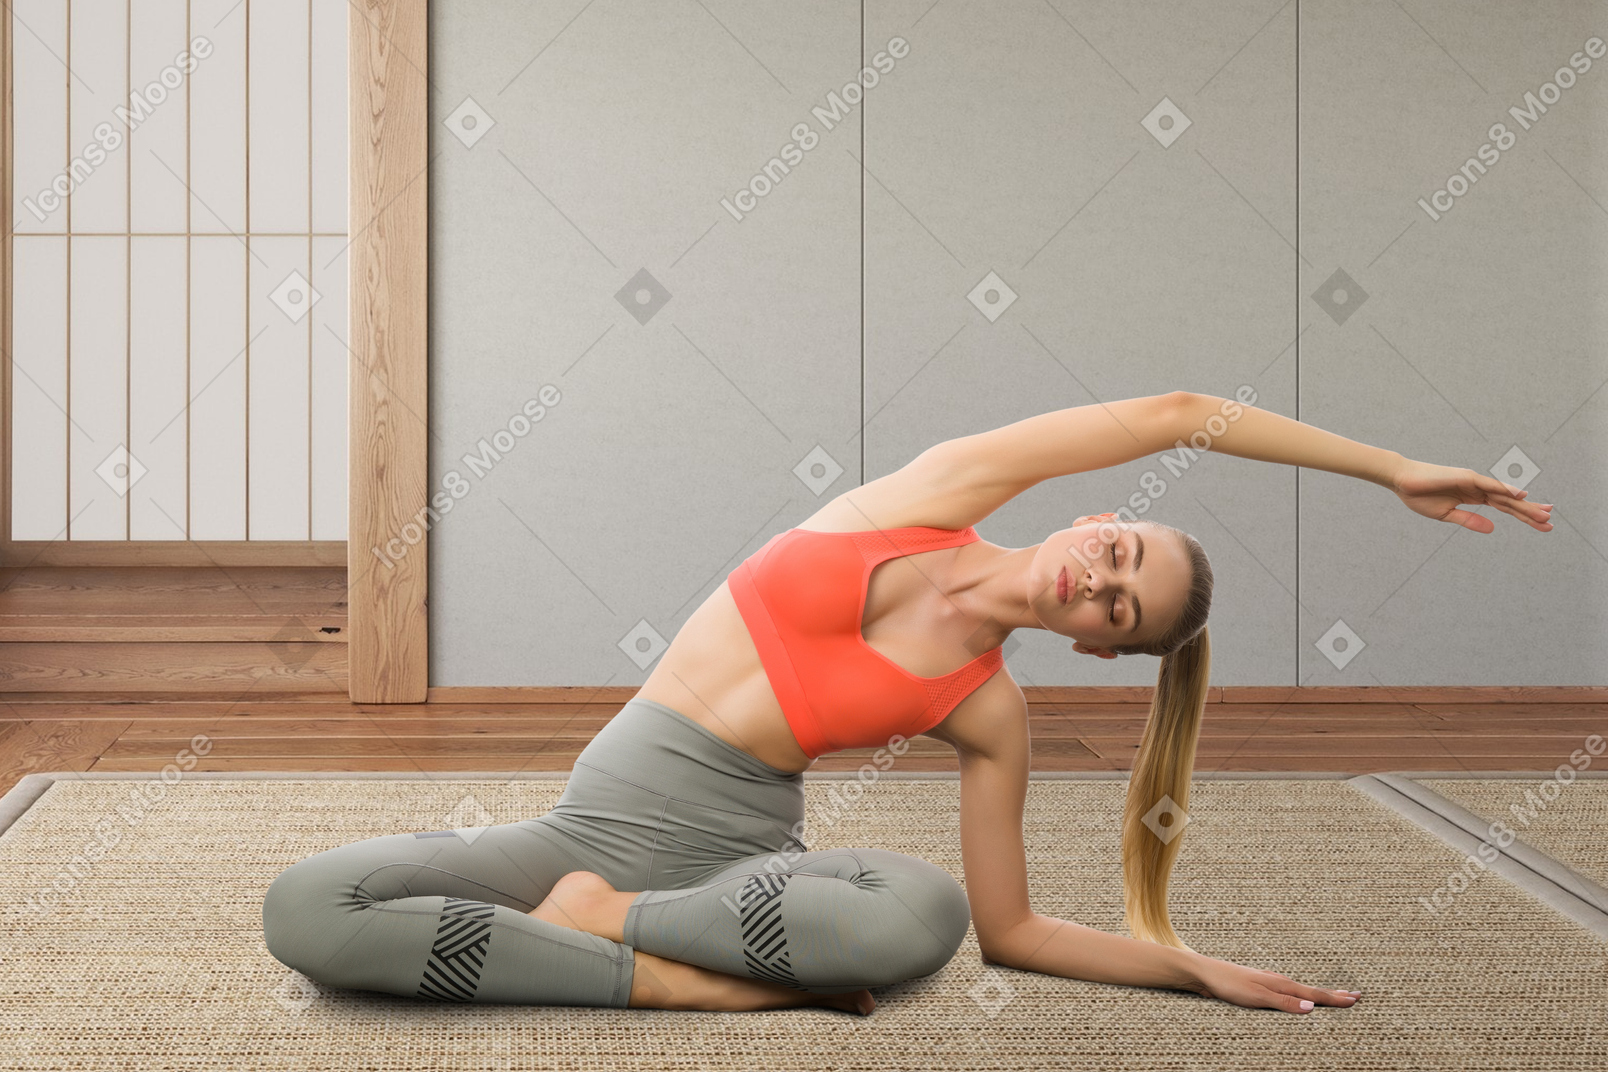 A woman is doing a yoga pose on the floor